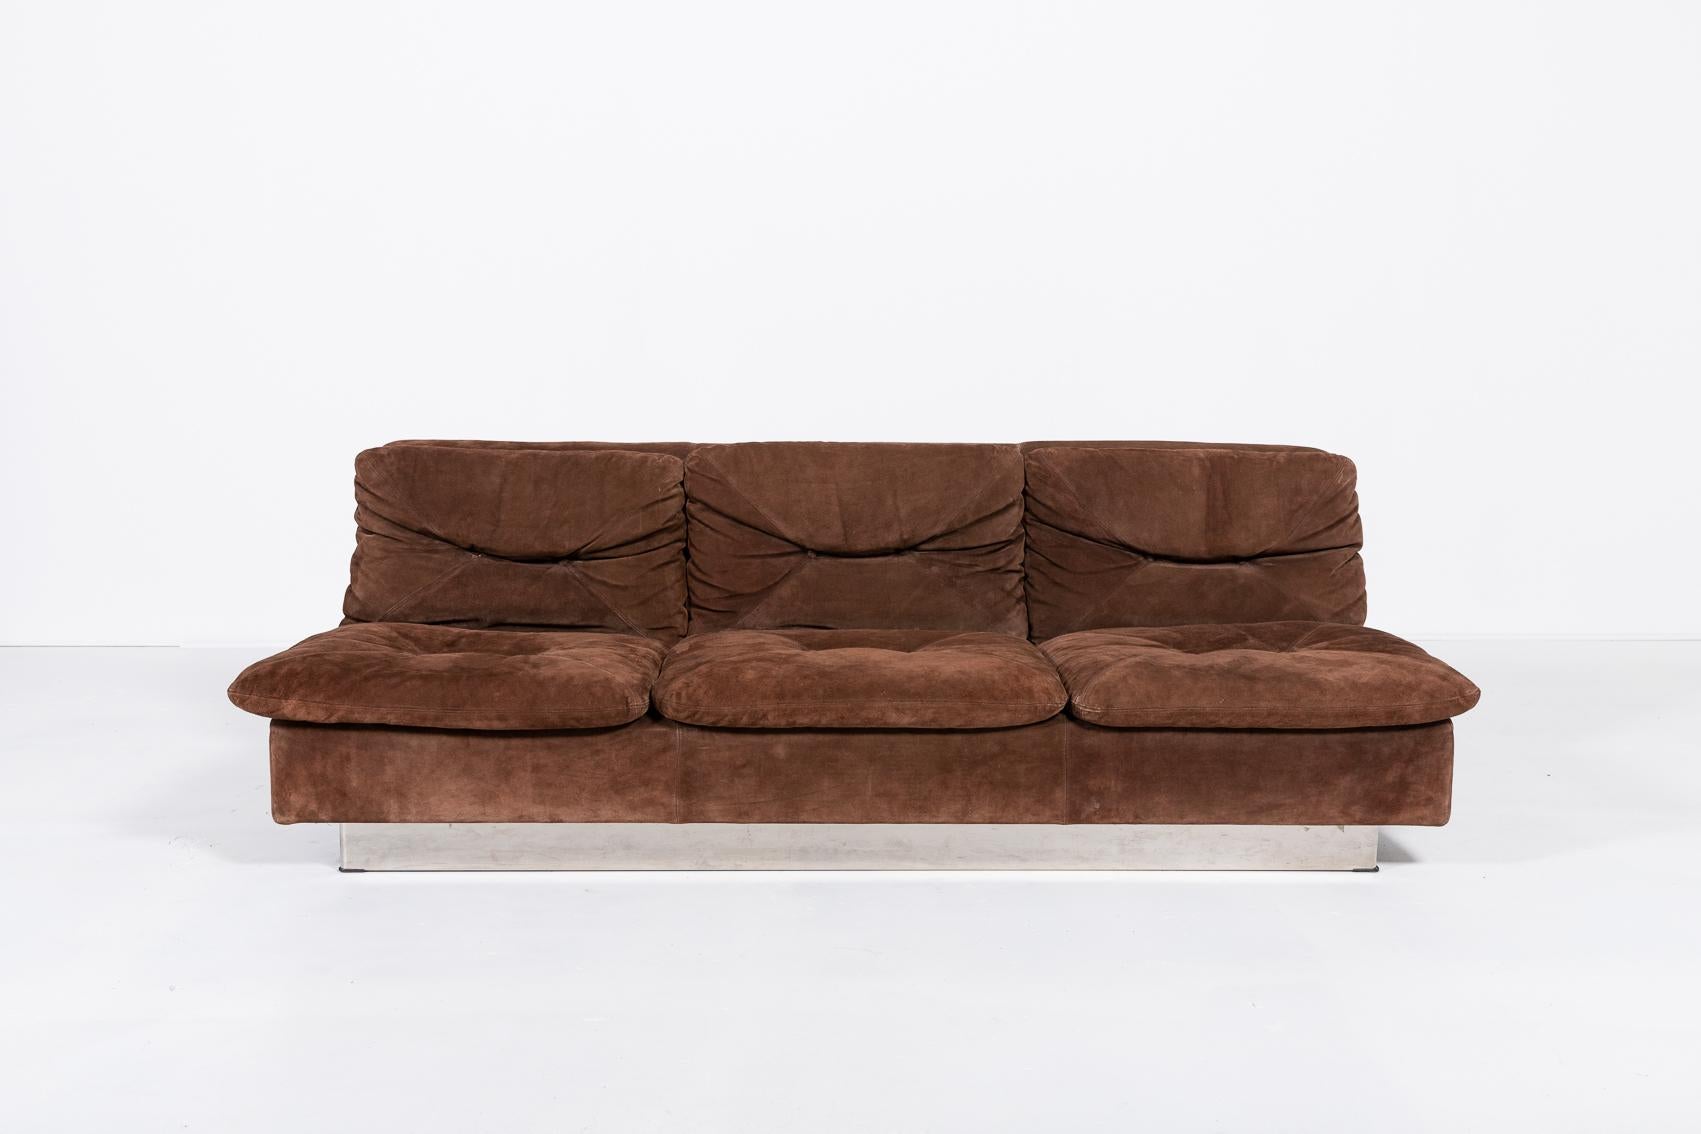 Beautiful brown suede three seat sofa designed by Giovanni Offredi for Saporiti. Very comfortable, equipped with loose cushions, bed function.

Condition
Good, age related wear and patina

Dimensions
width: 80,71 inch
depth: 33,46 inch
height: 28,34